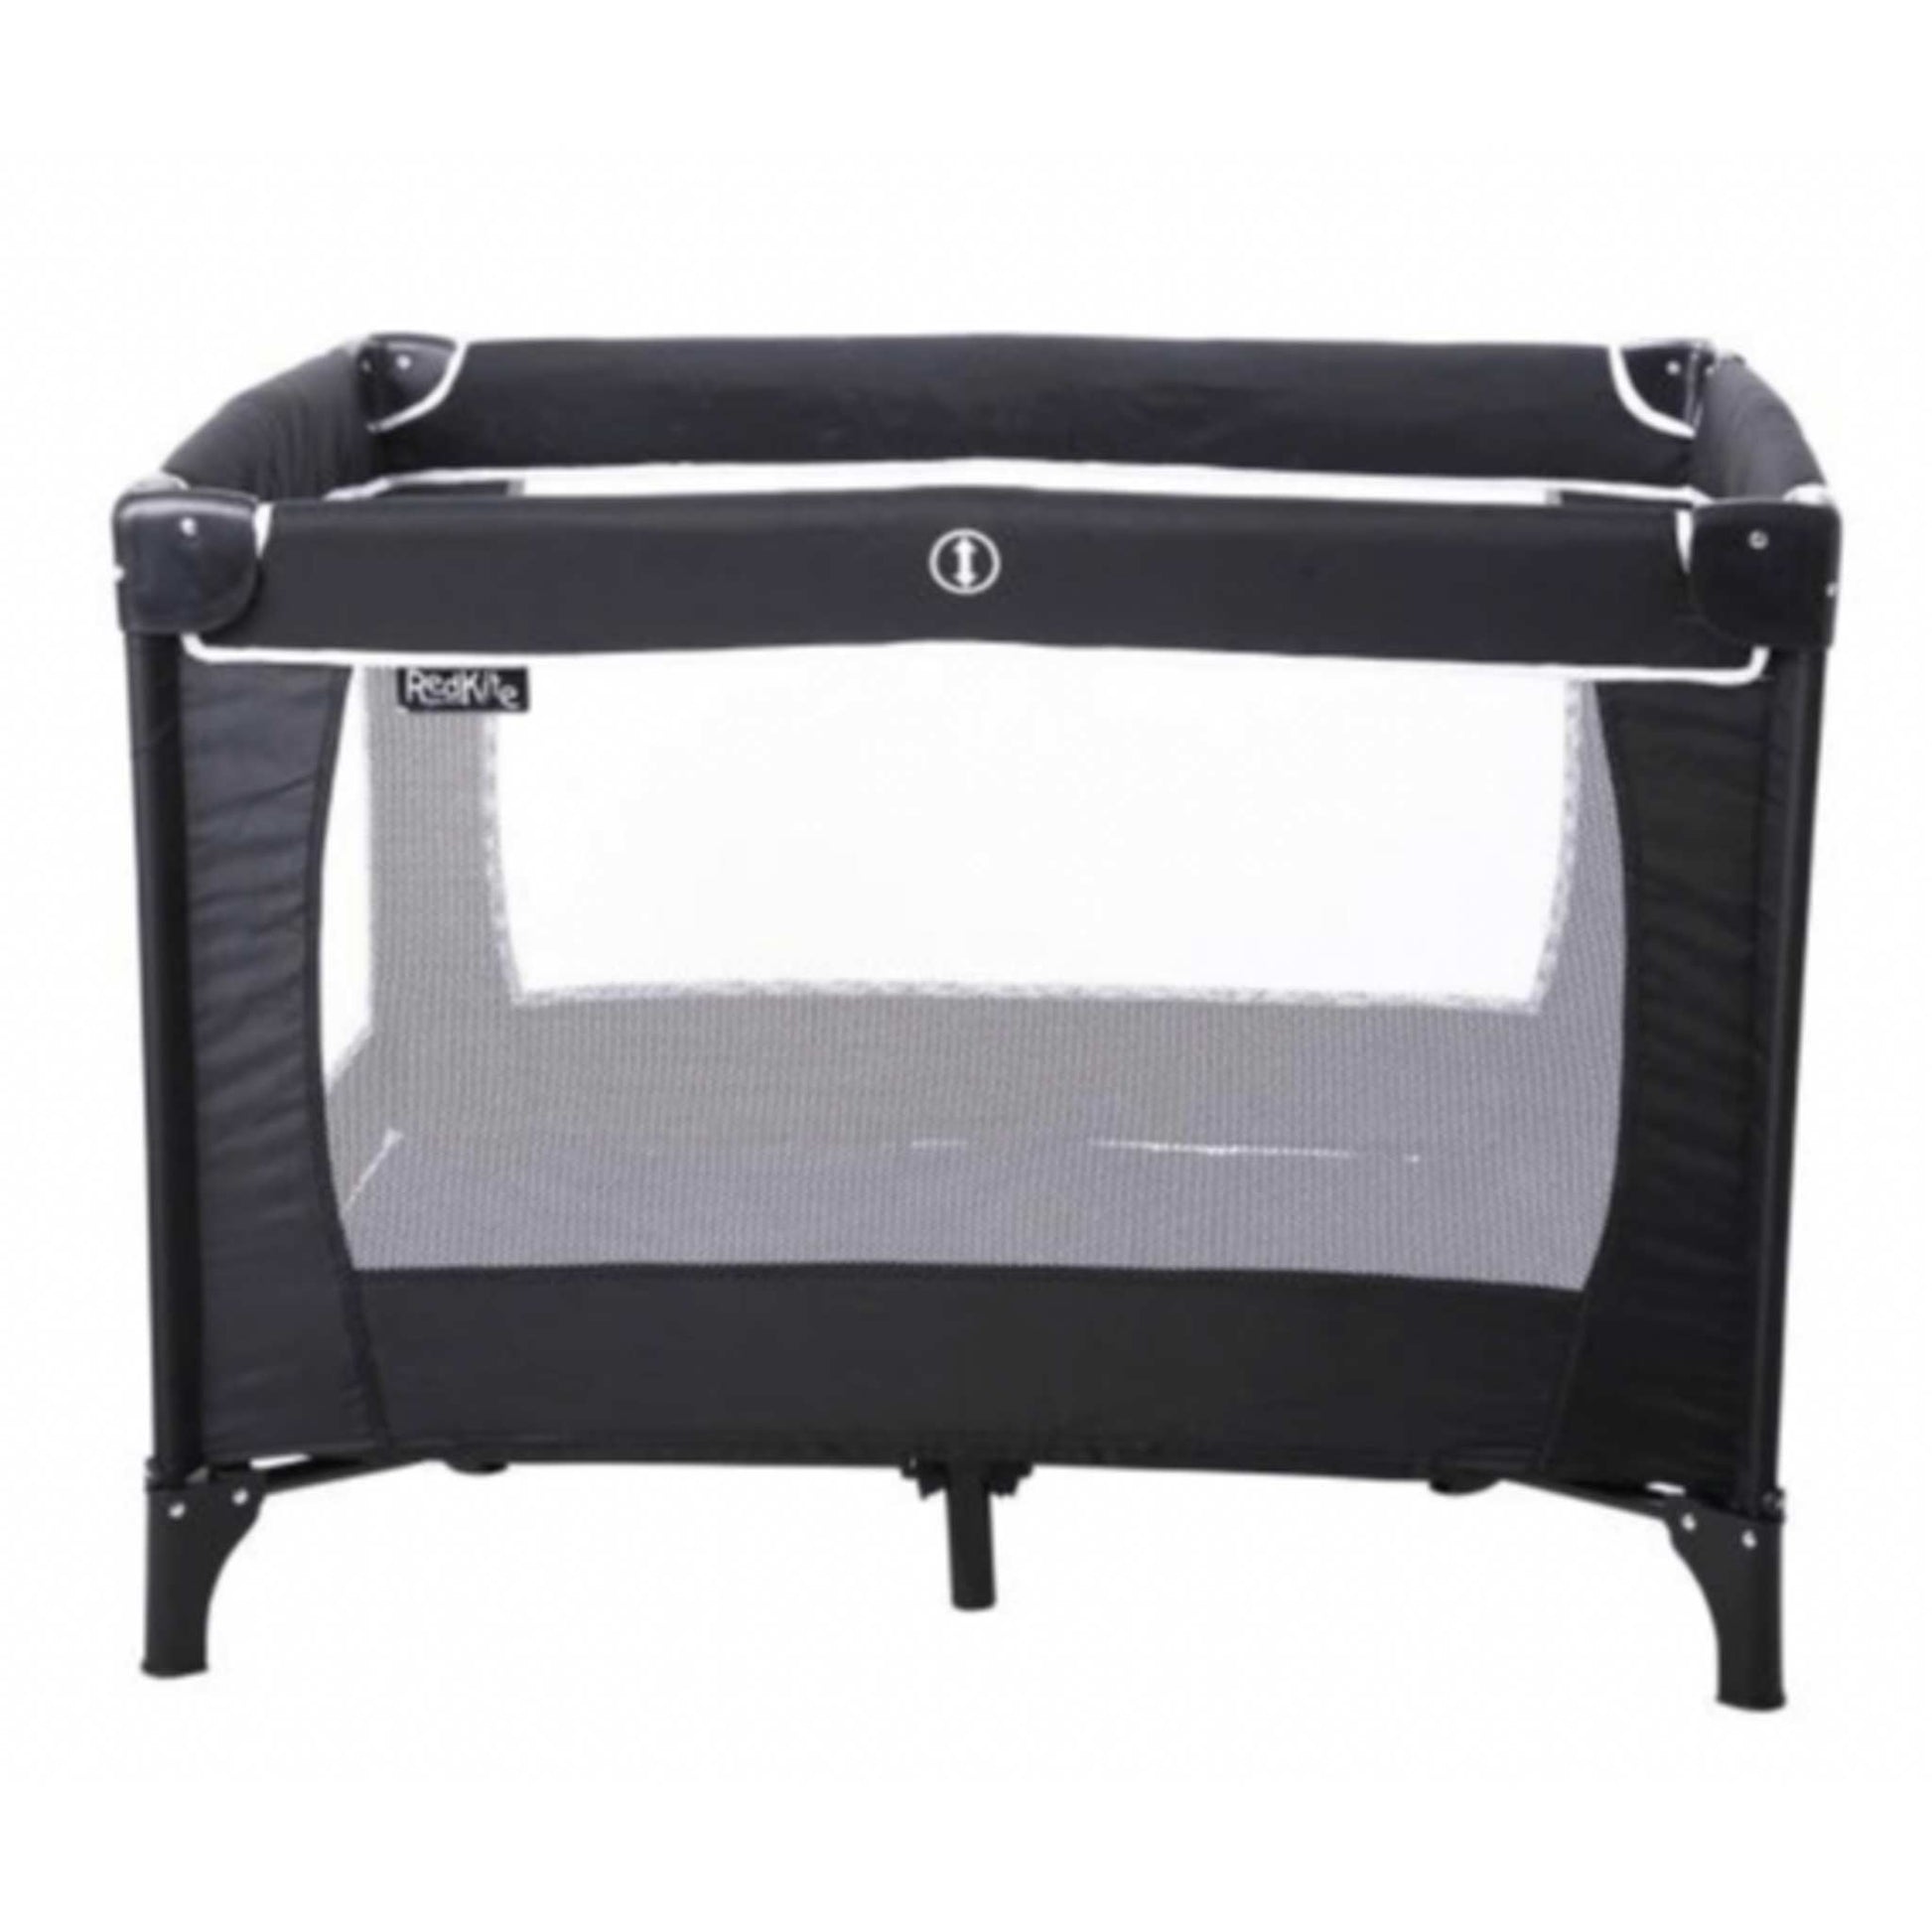 Compact travel cot in black